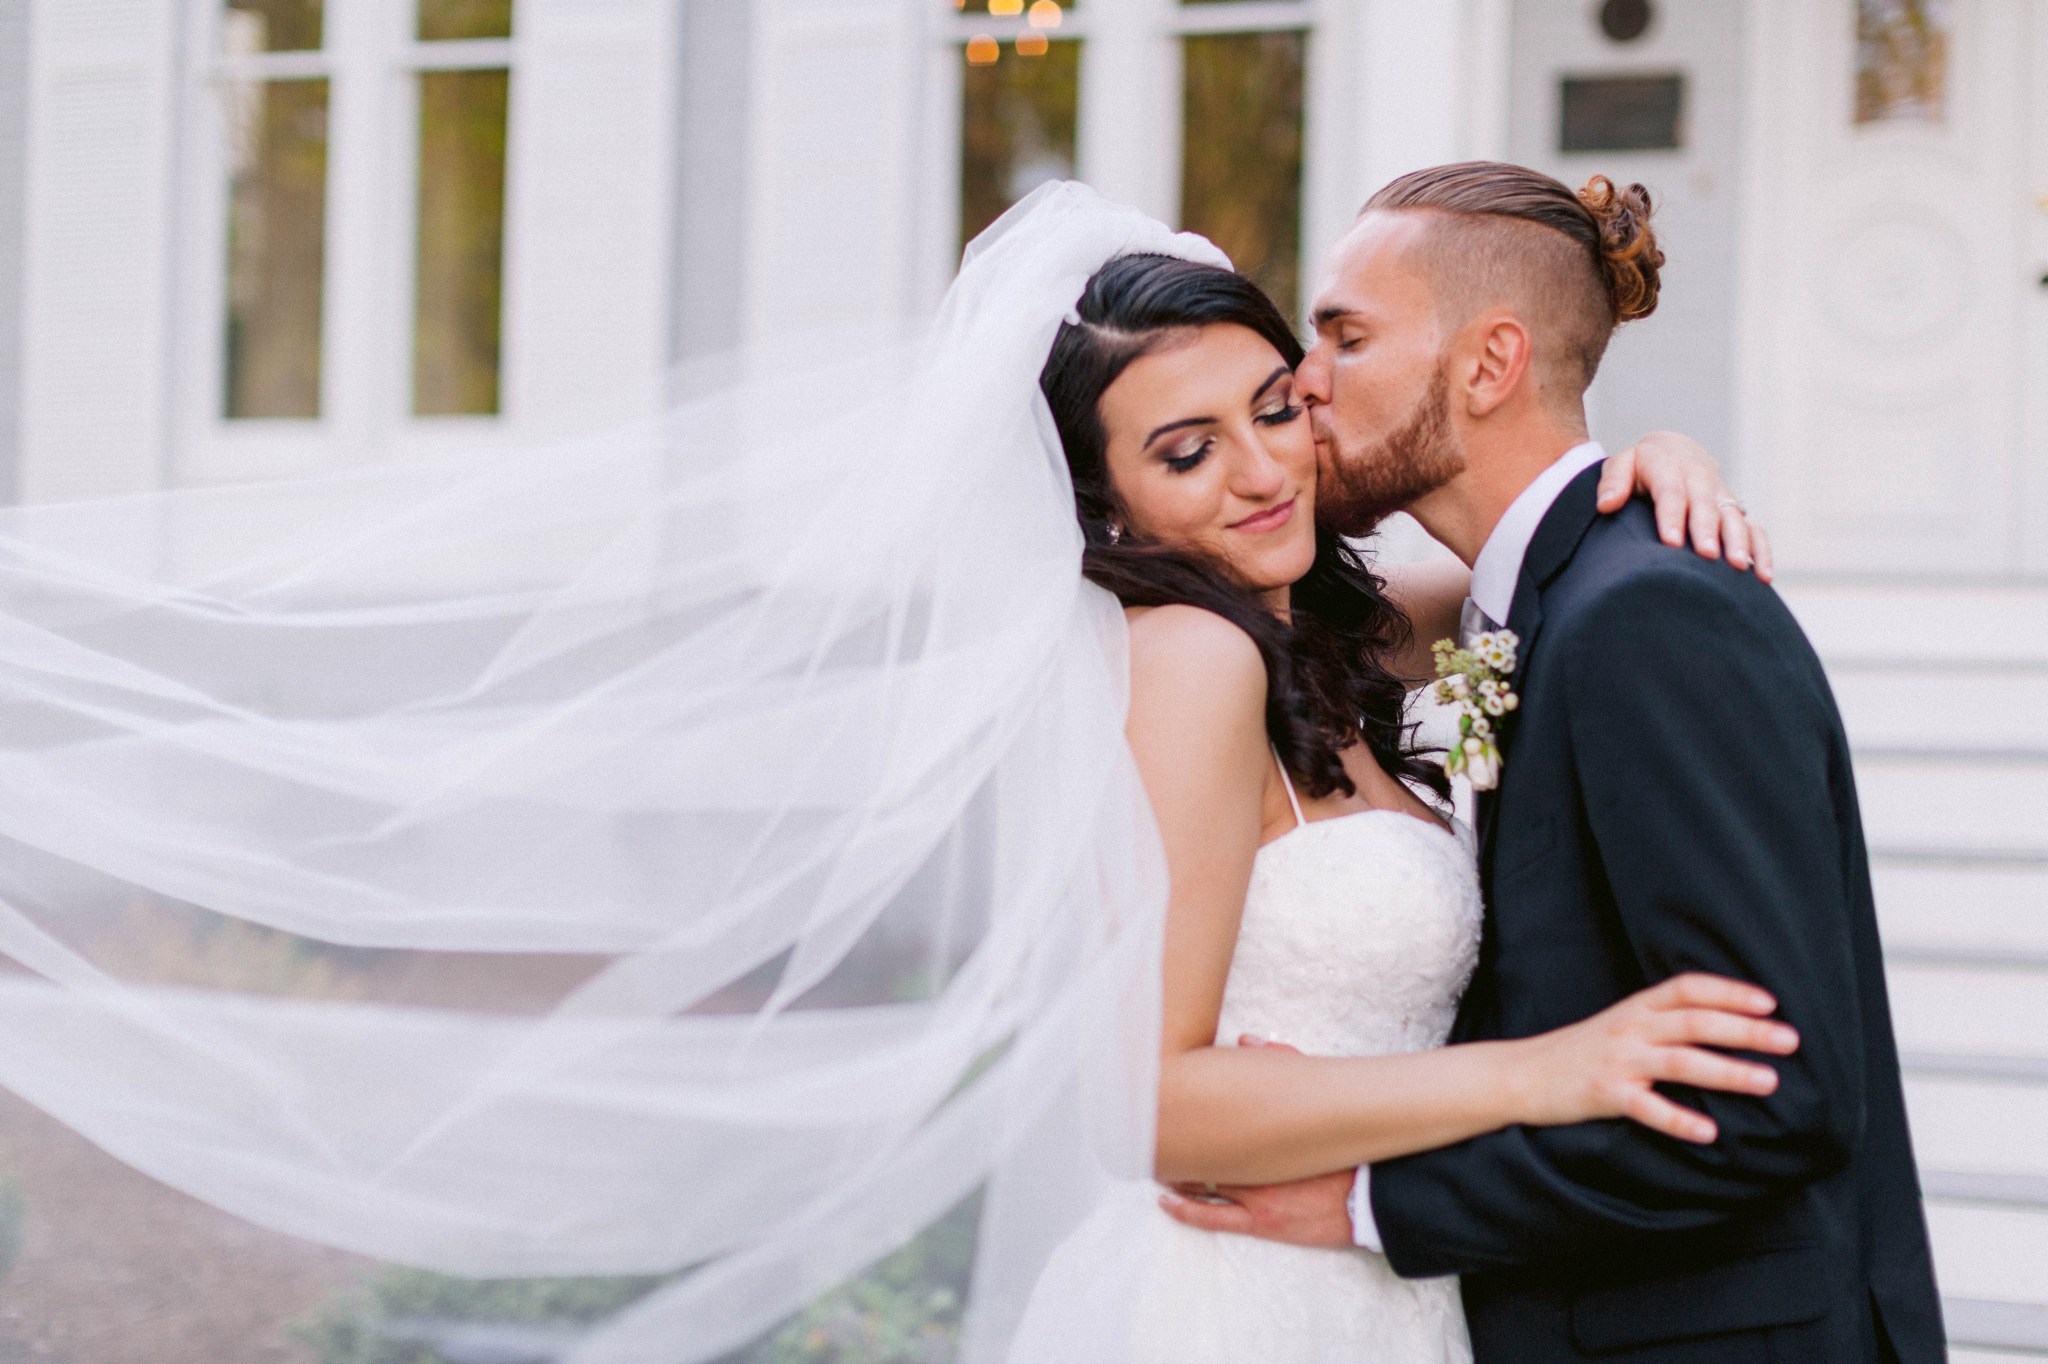  Veil shot - Wedding Portraits on the front porch of an all white luxury estate - Bride is wearing a Aline Ballgown by Cherish by Southern Bride with a long cathedral veil - Groom is wearing a black suit by Generation Tux and has a man bun - Fine Art